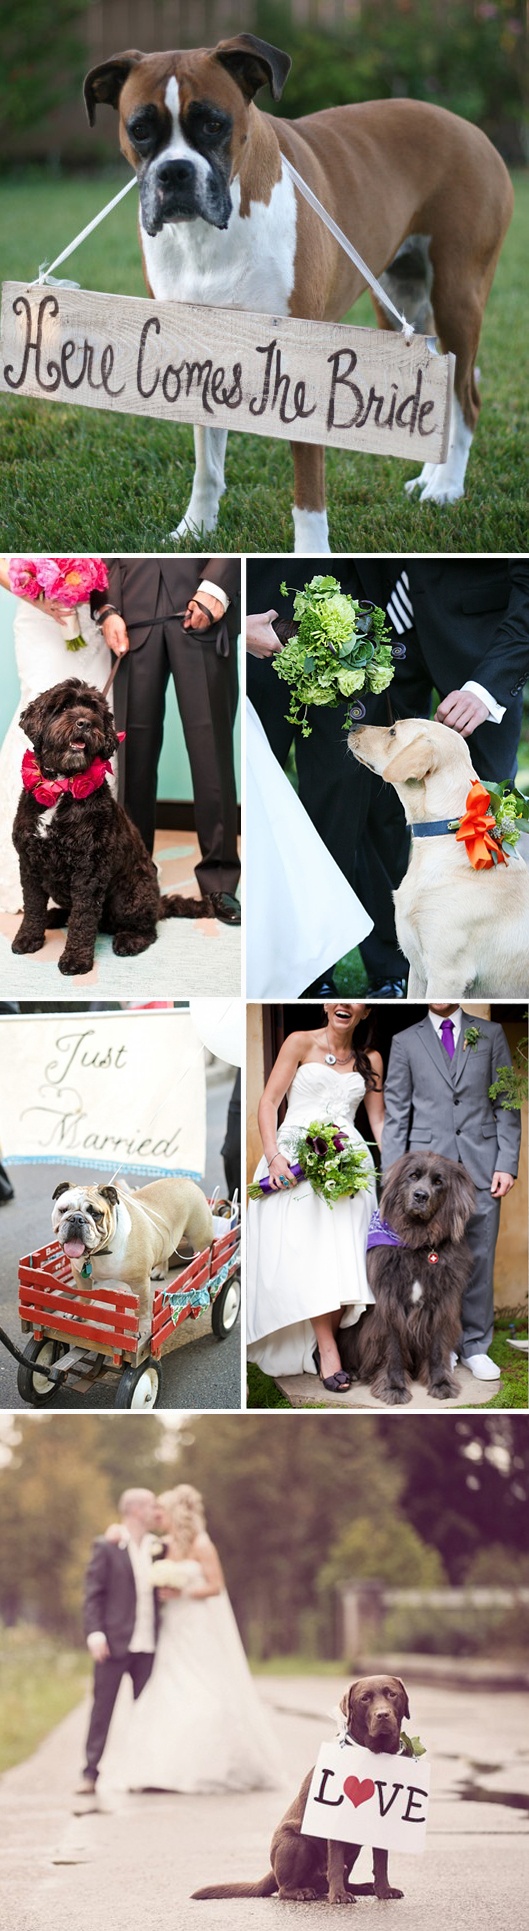 wedding fog ideas -get a doggie attendant to help keep the day manageable